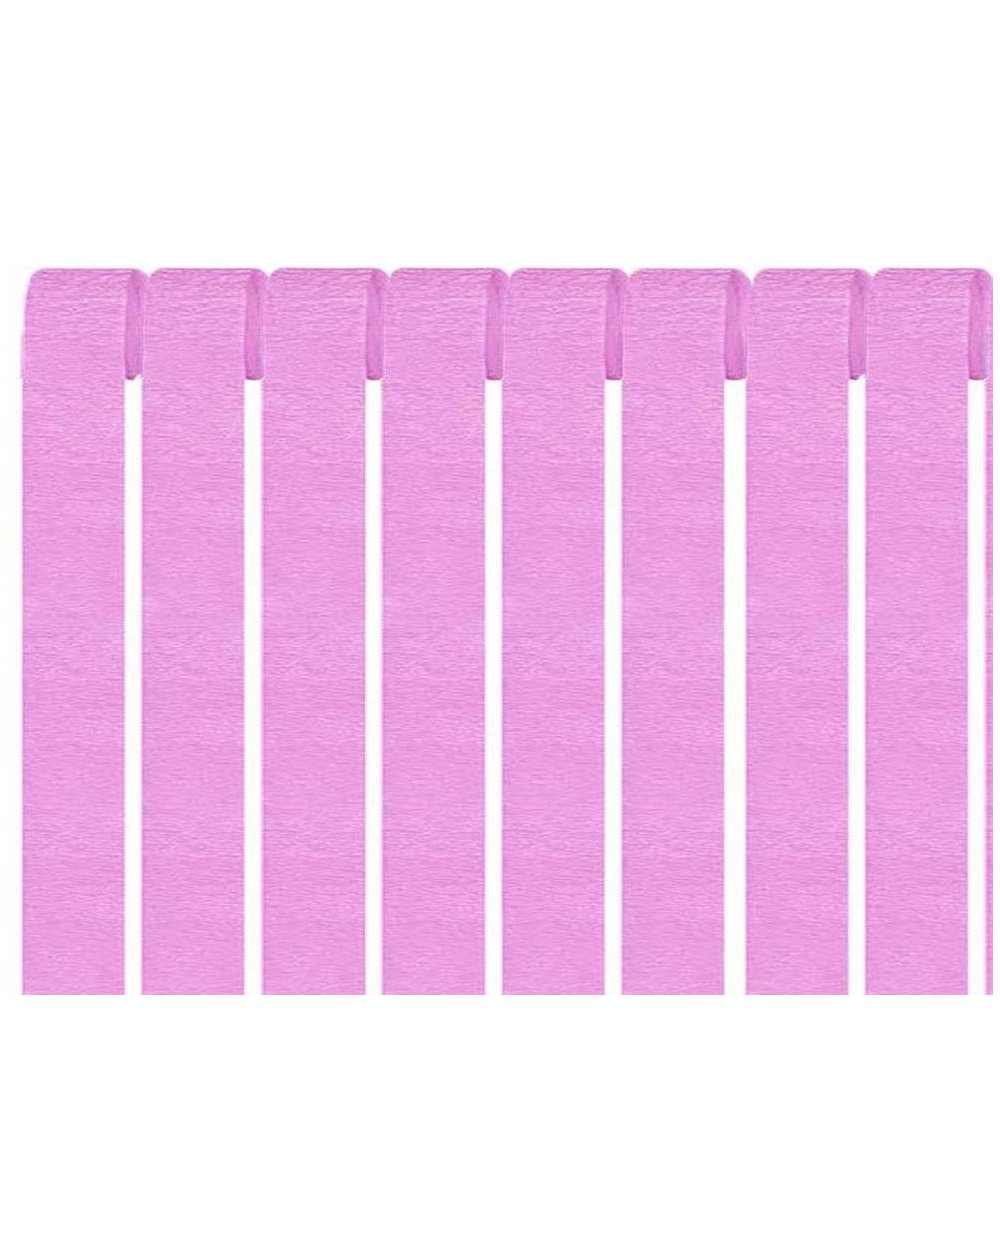 Streamers Pink Crepe Paper Streamers- 2.6 Inch Widening 8 Rolls Light Pink Party Streamers Decorations for Birthday Party- Fa...